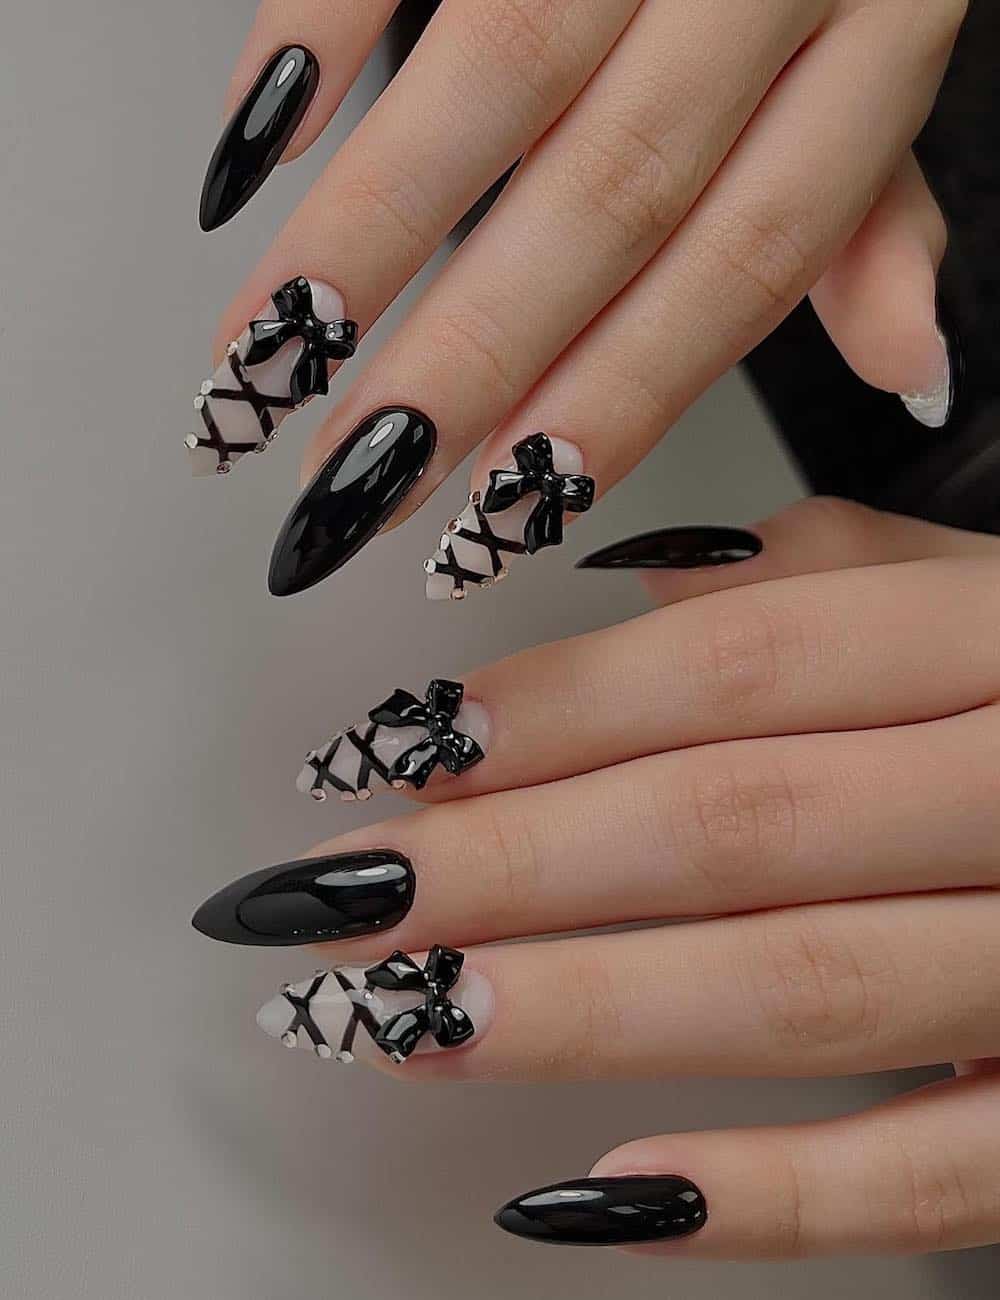 long stiletto nails painted black and milky white with lace-up nail art and black bow charms